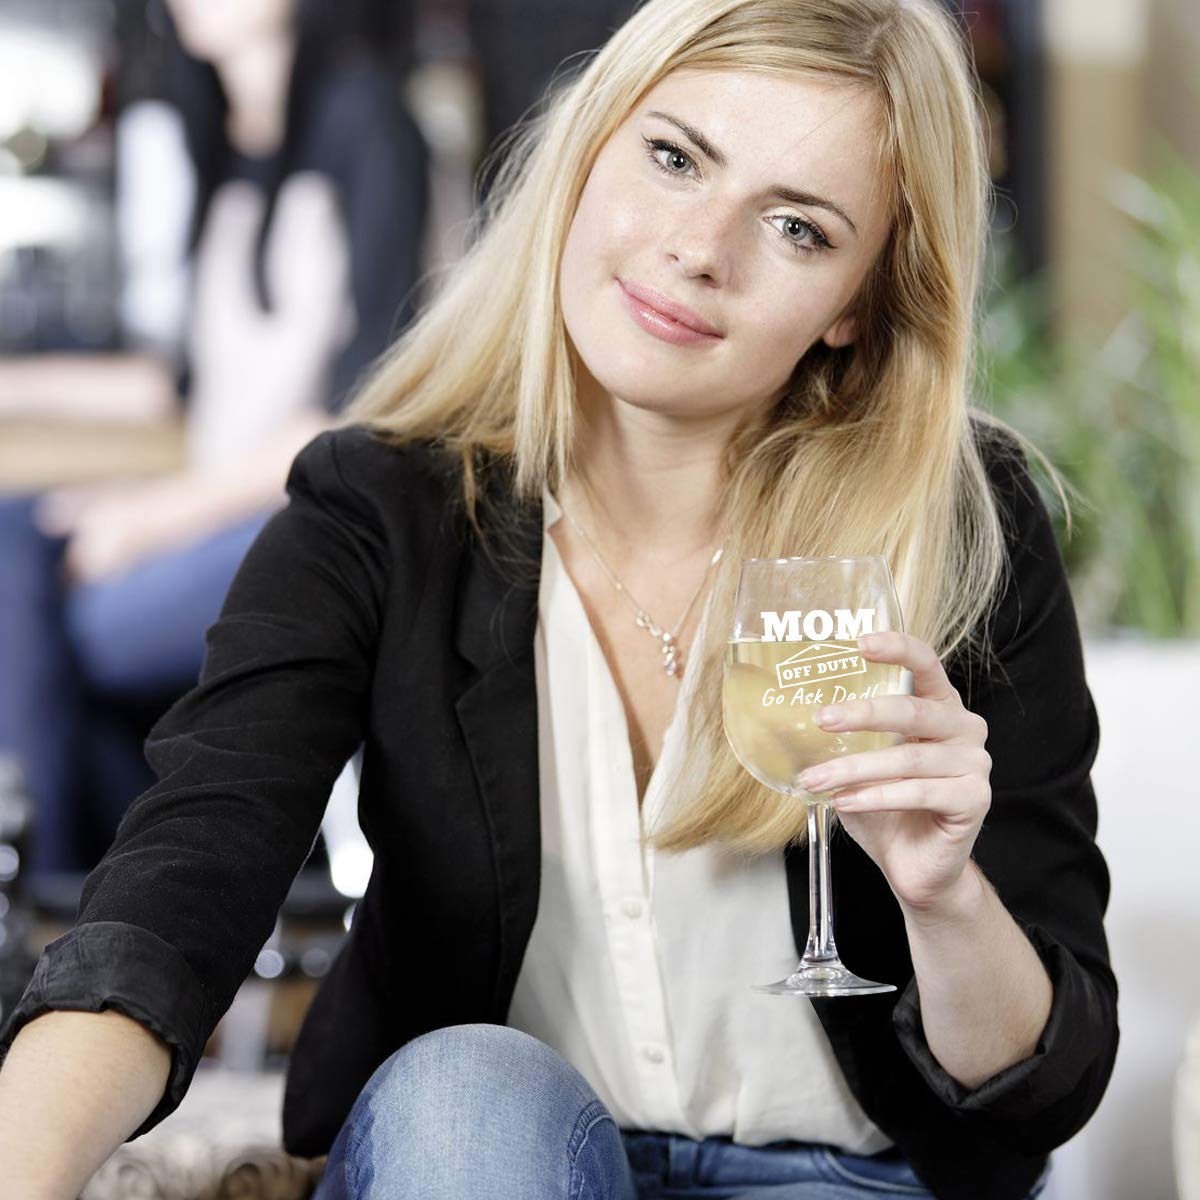 Mom Off Duty Funny Mom Wine Glass- Funny Wine Glasses to Mom for Birthday- Gift for Her, Mom, Best Friend or Wife Gifts- Unique Present Idea when Mommin' Ain't Easy